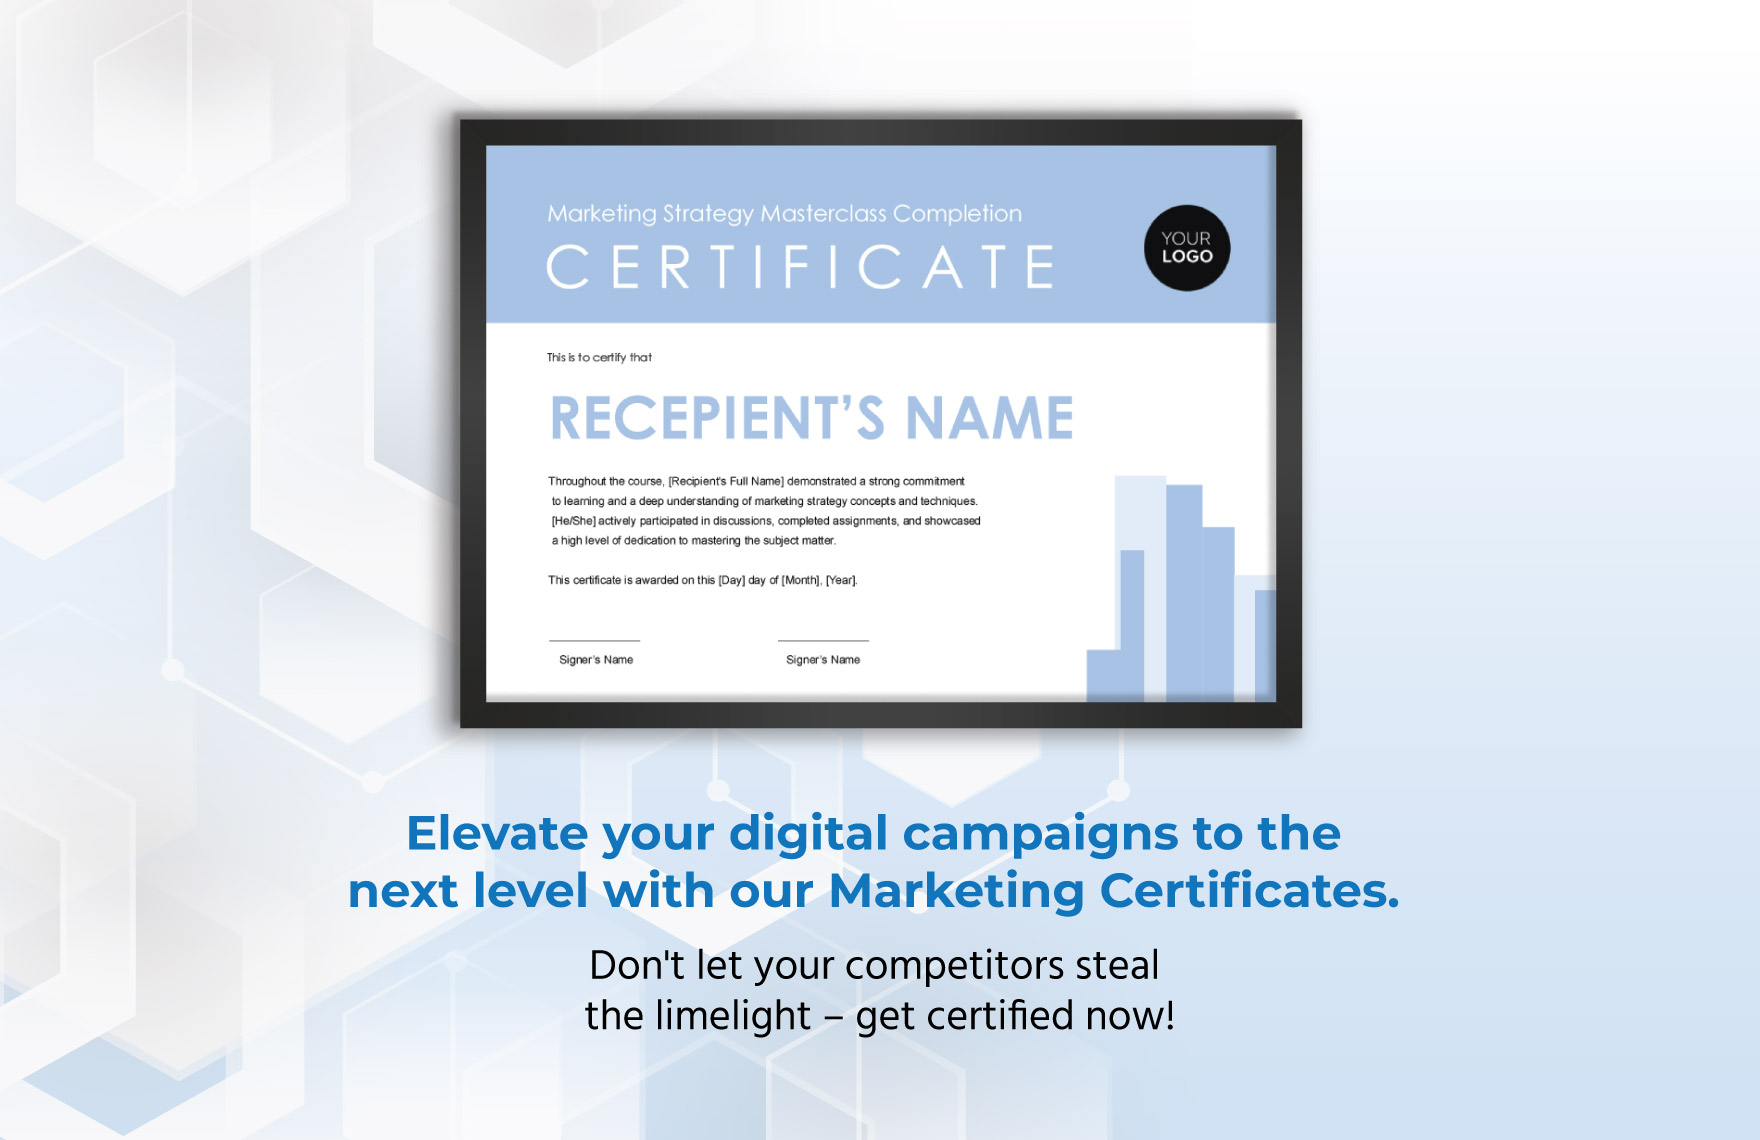 Marketing Strategy Masterclass Completion Certificate Template